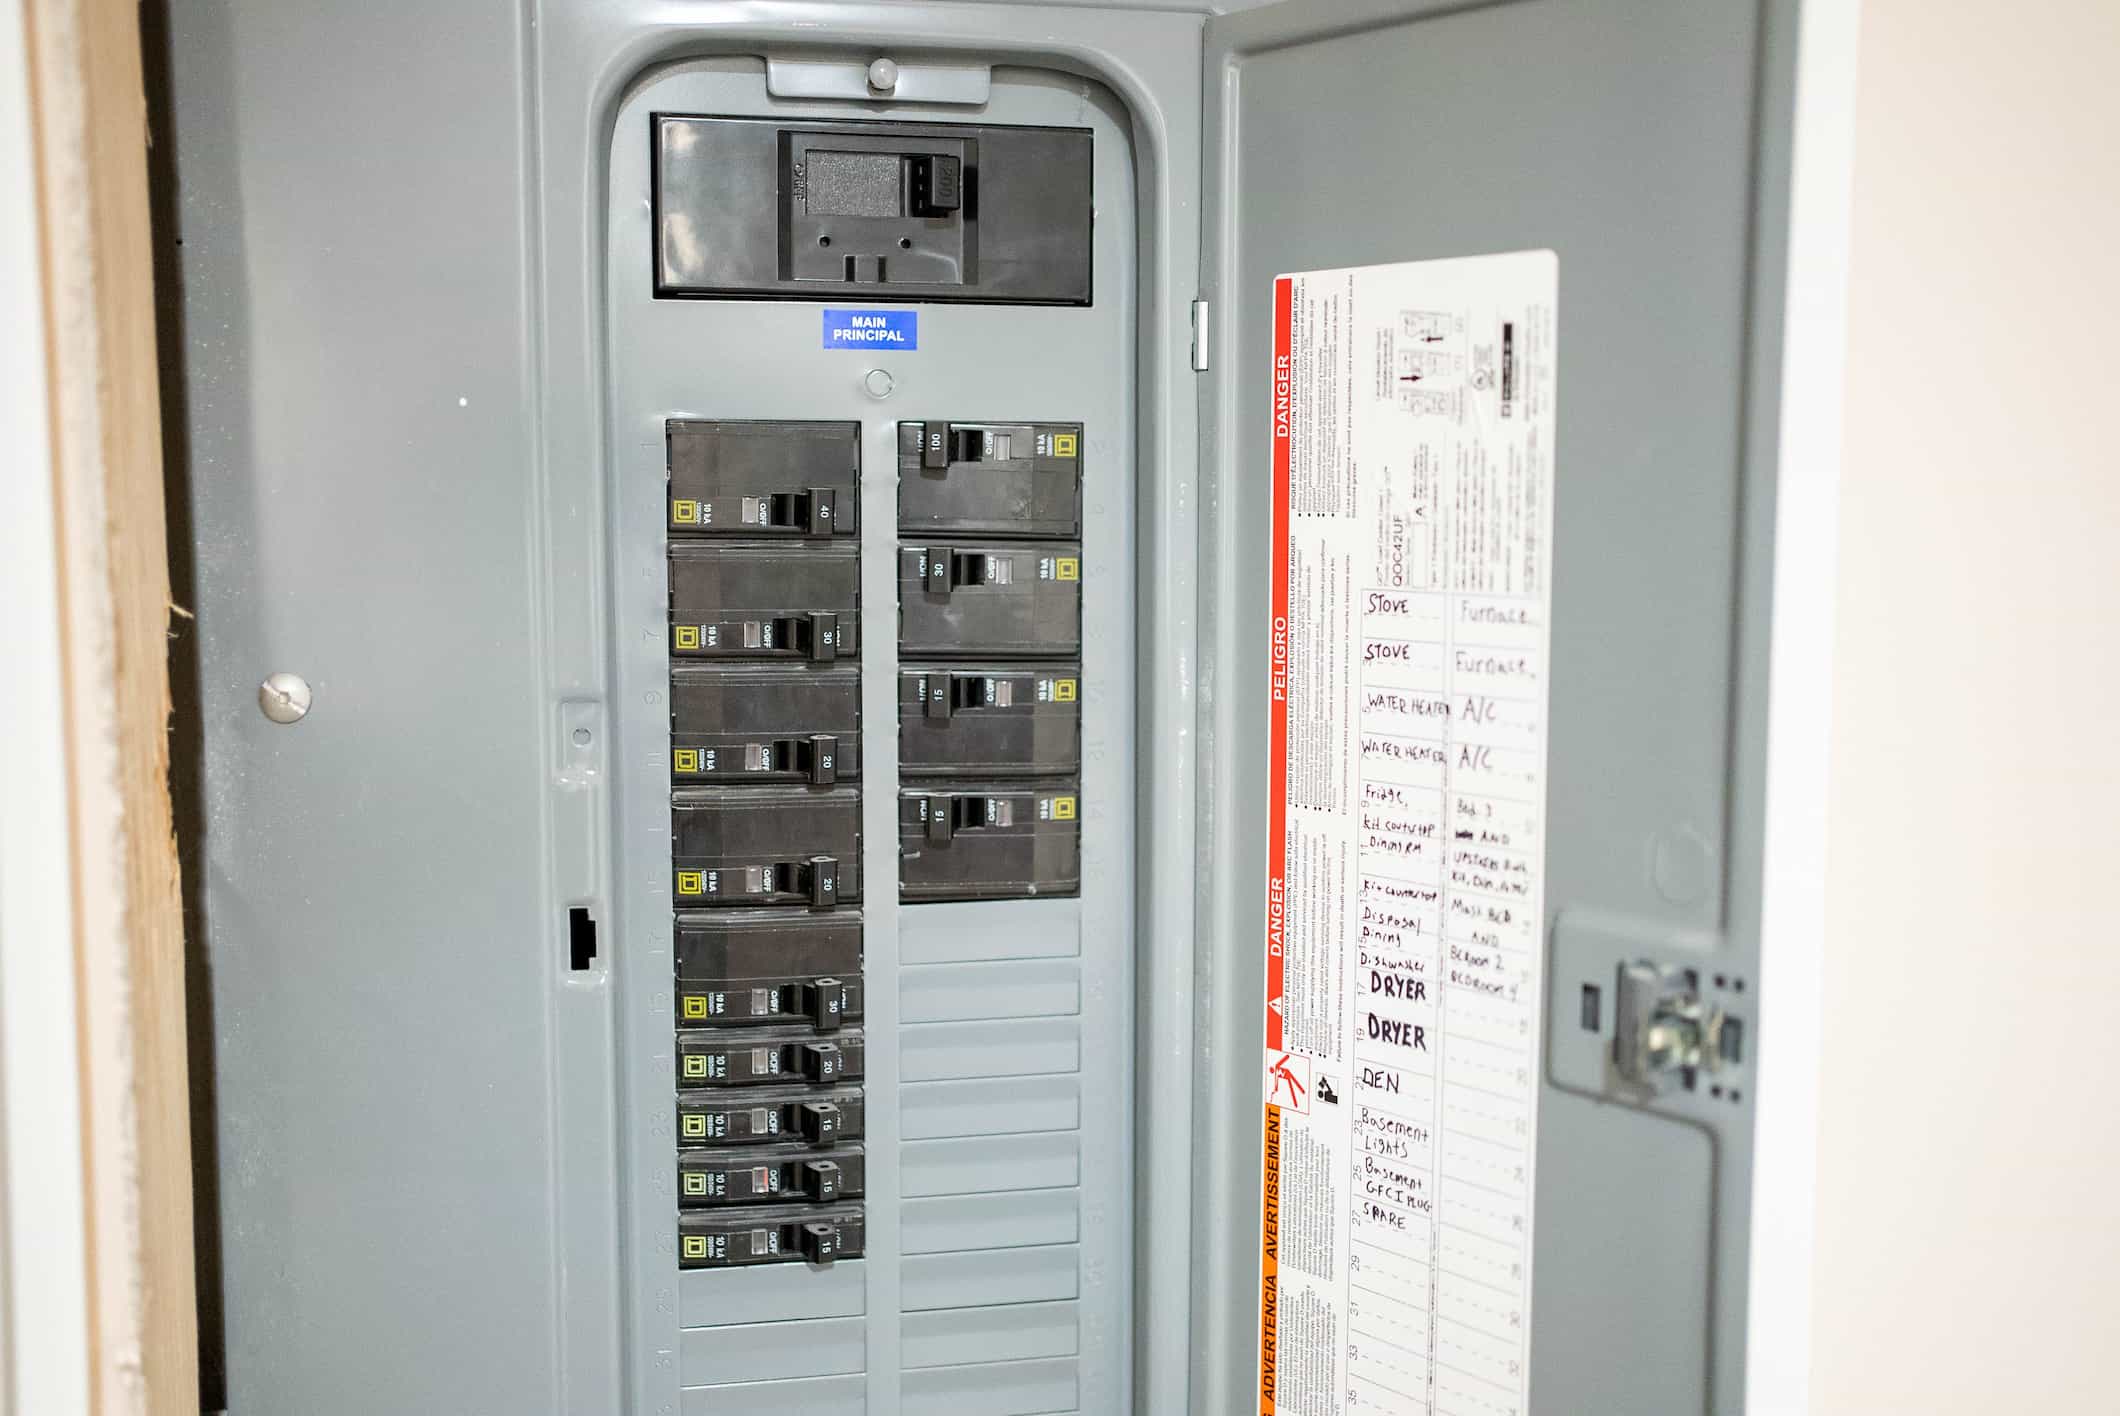 DIY Without Fear | Should Circuit Breakers Be Warm? How Can You Tell?